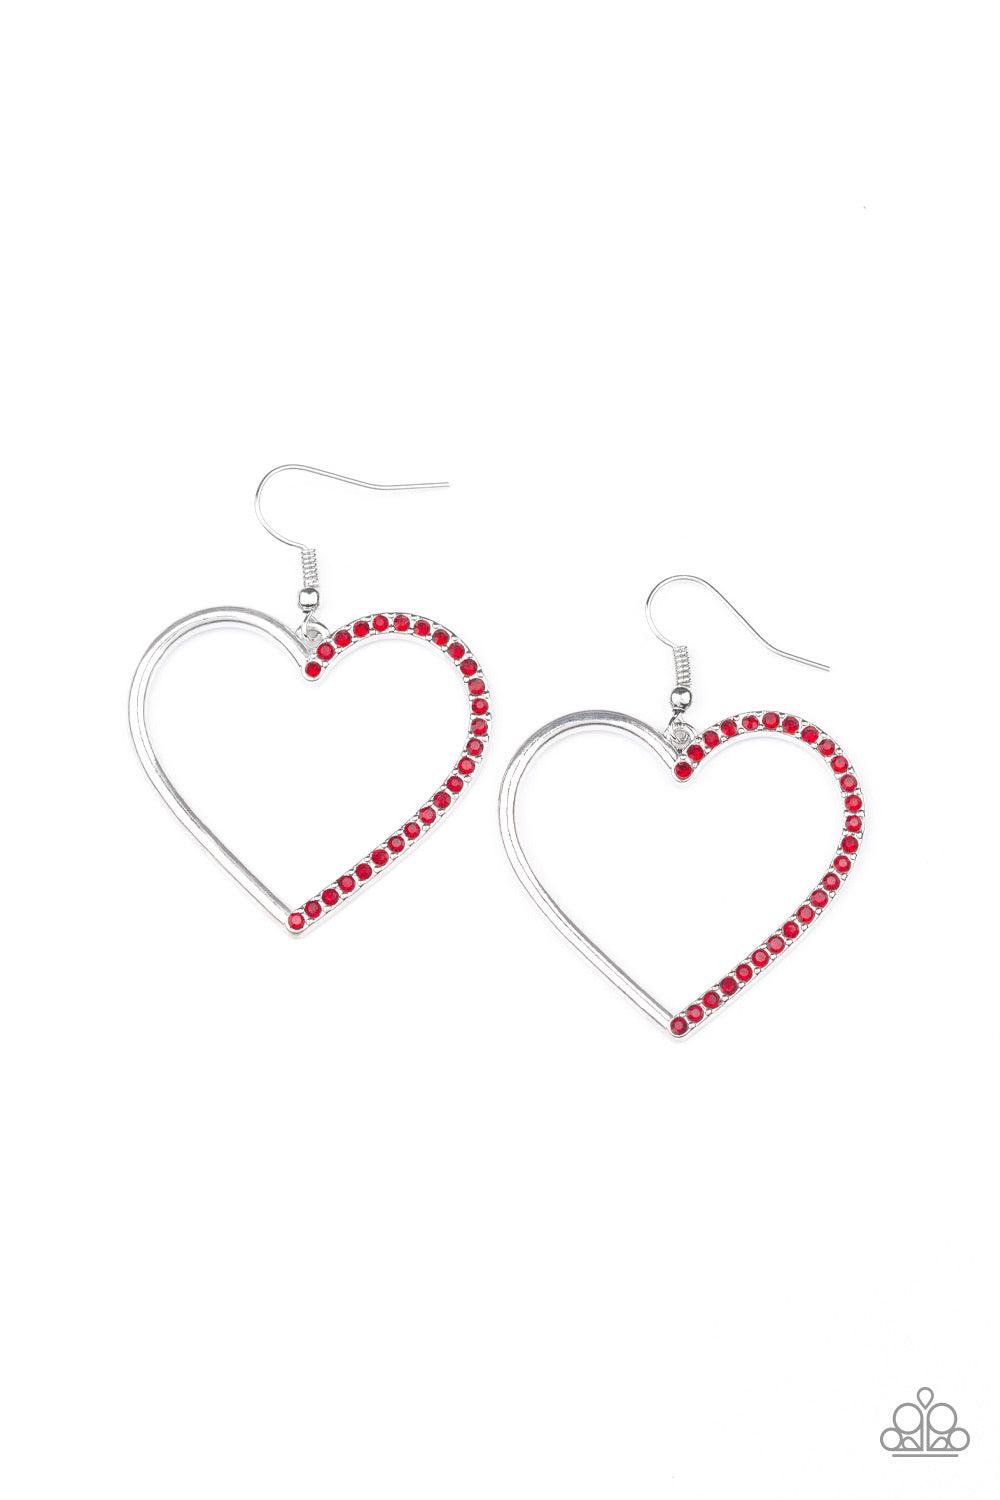 Paparazzi Accessories First Date Dazzle - Red One half of a shimmery silver heart silhouette has been encrusted in glassy red rhinestones, creating a charming frame. Earring attaches to a standard fishhook fitting. Jewelry